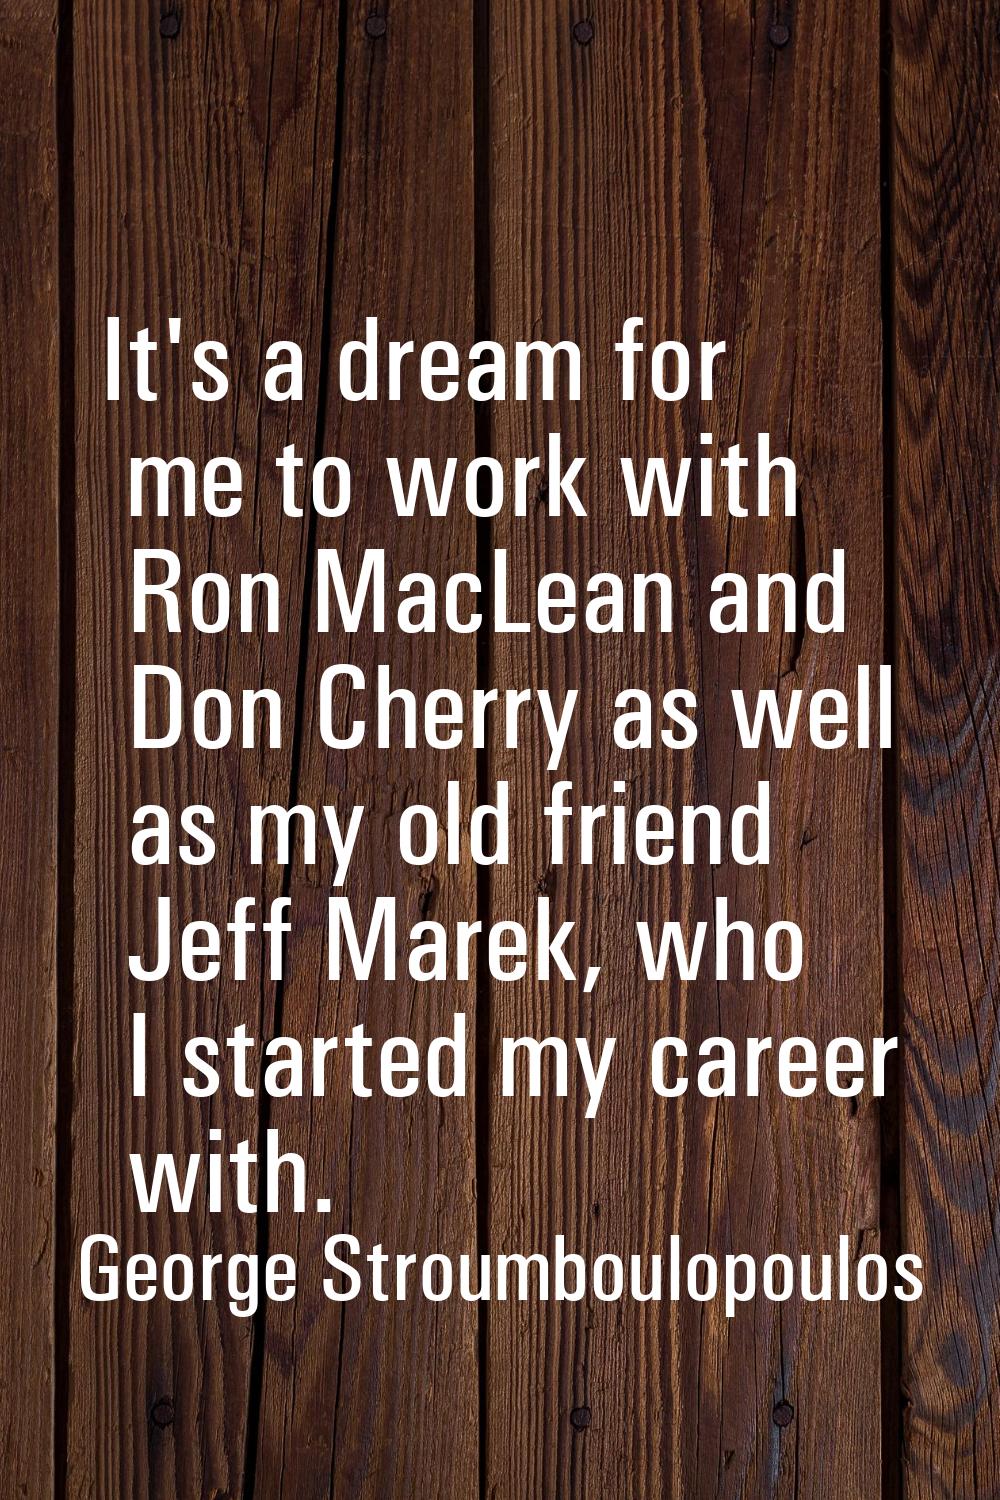 It's a dream for me to work with Ron MacLean and Don Cherry as well as my old friend Jeff Marek, wh